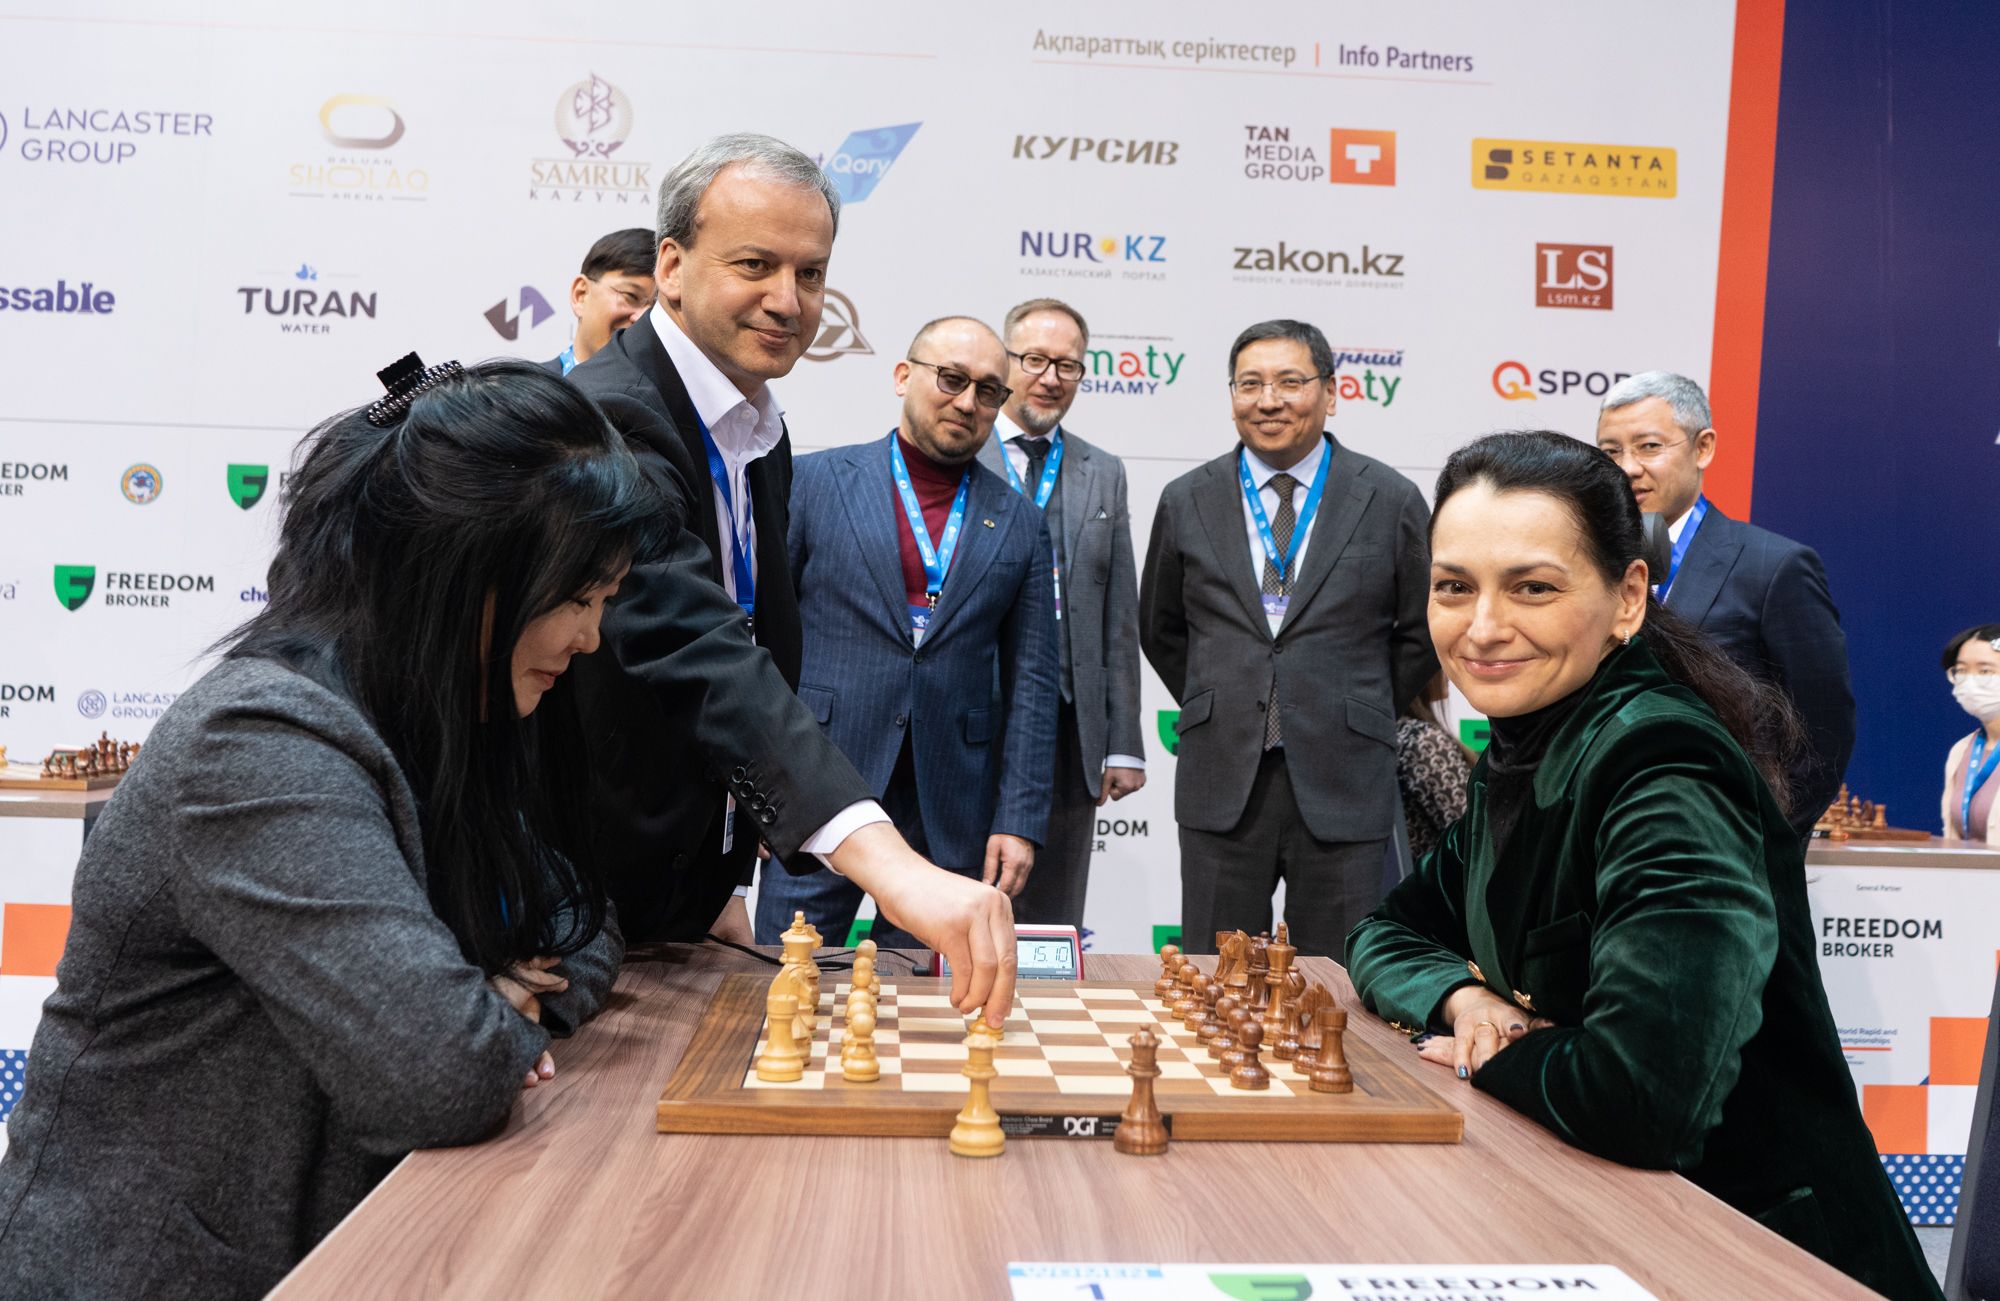 FIDE World Rapid Team Championship: WR Chess continues dominance with  perfect streak